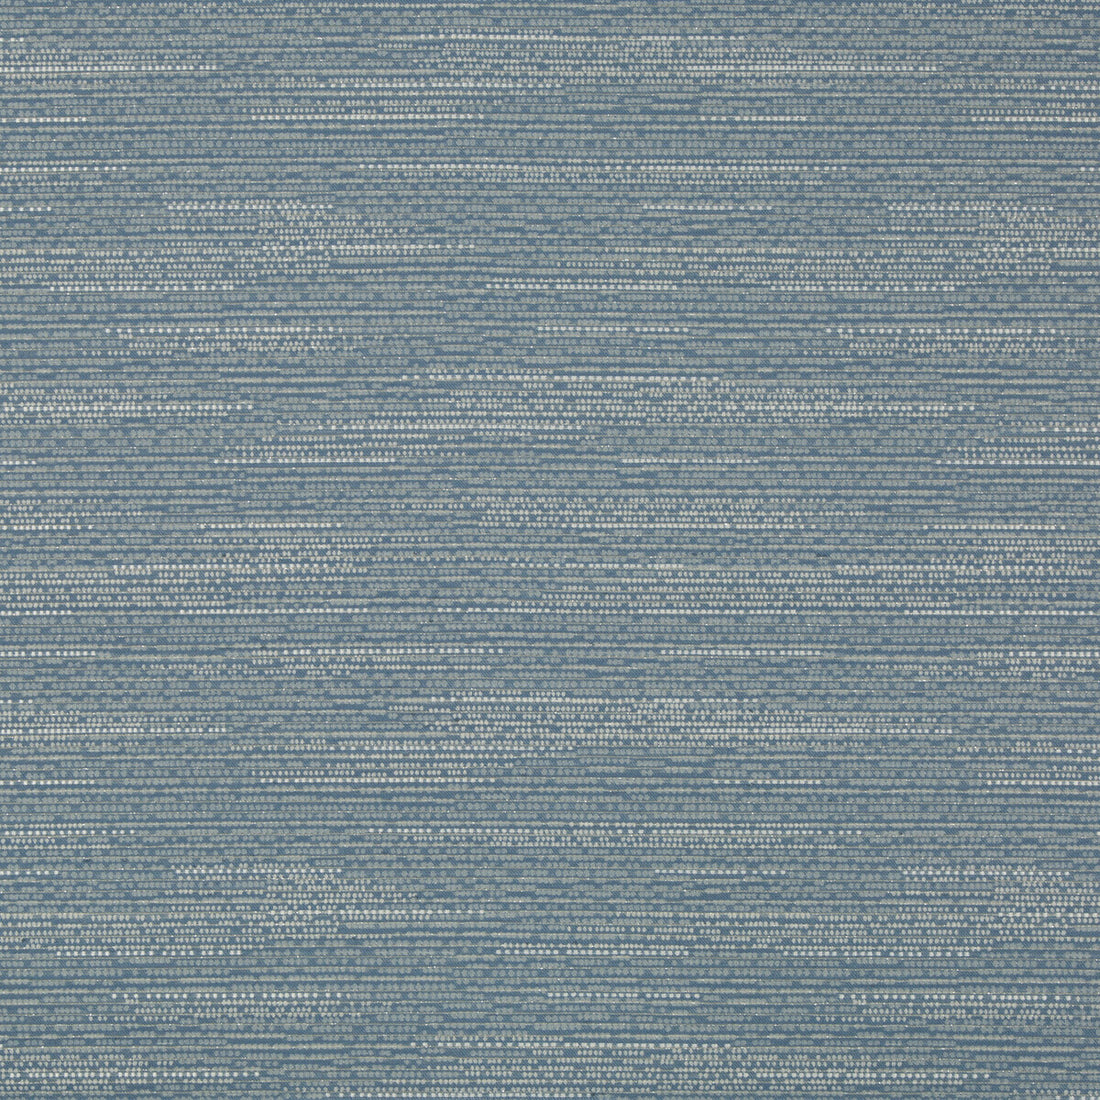 Waterline fabric in satellite color - pattern 32934.5.0 - by Kravet Contract in the Gis Crypton collection